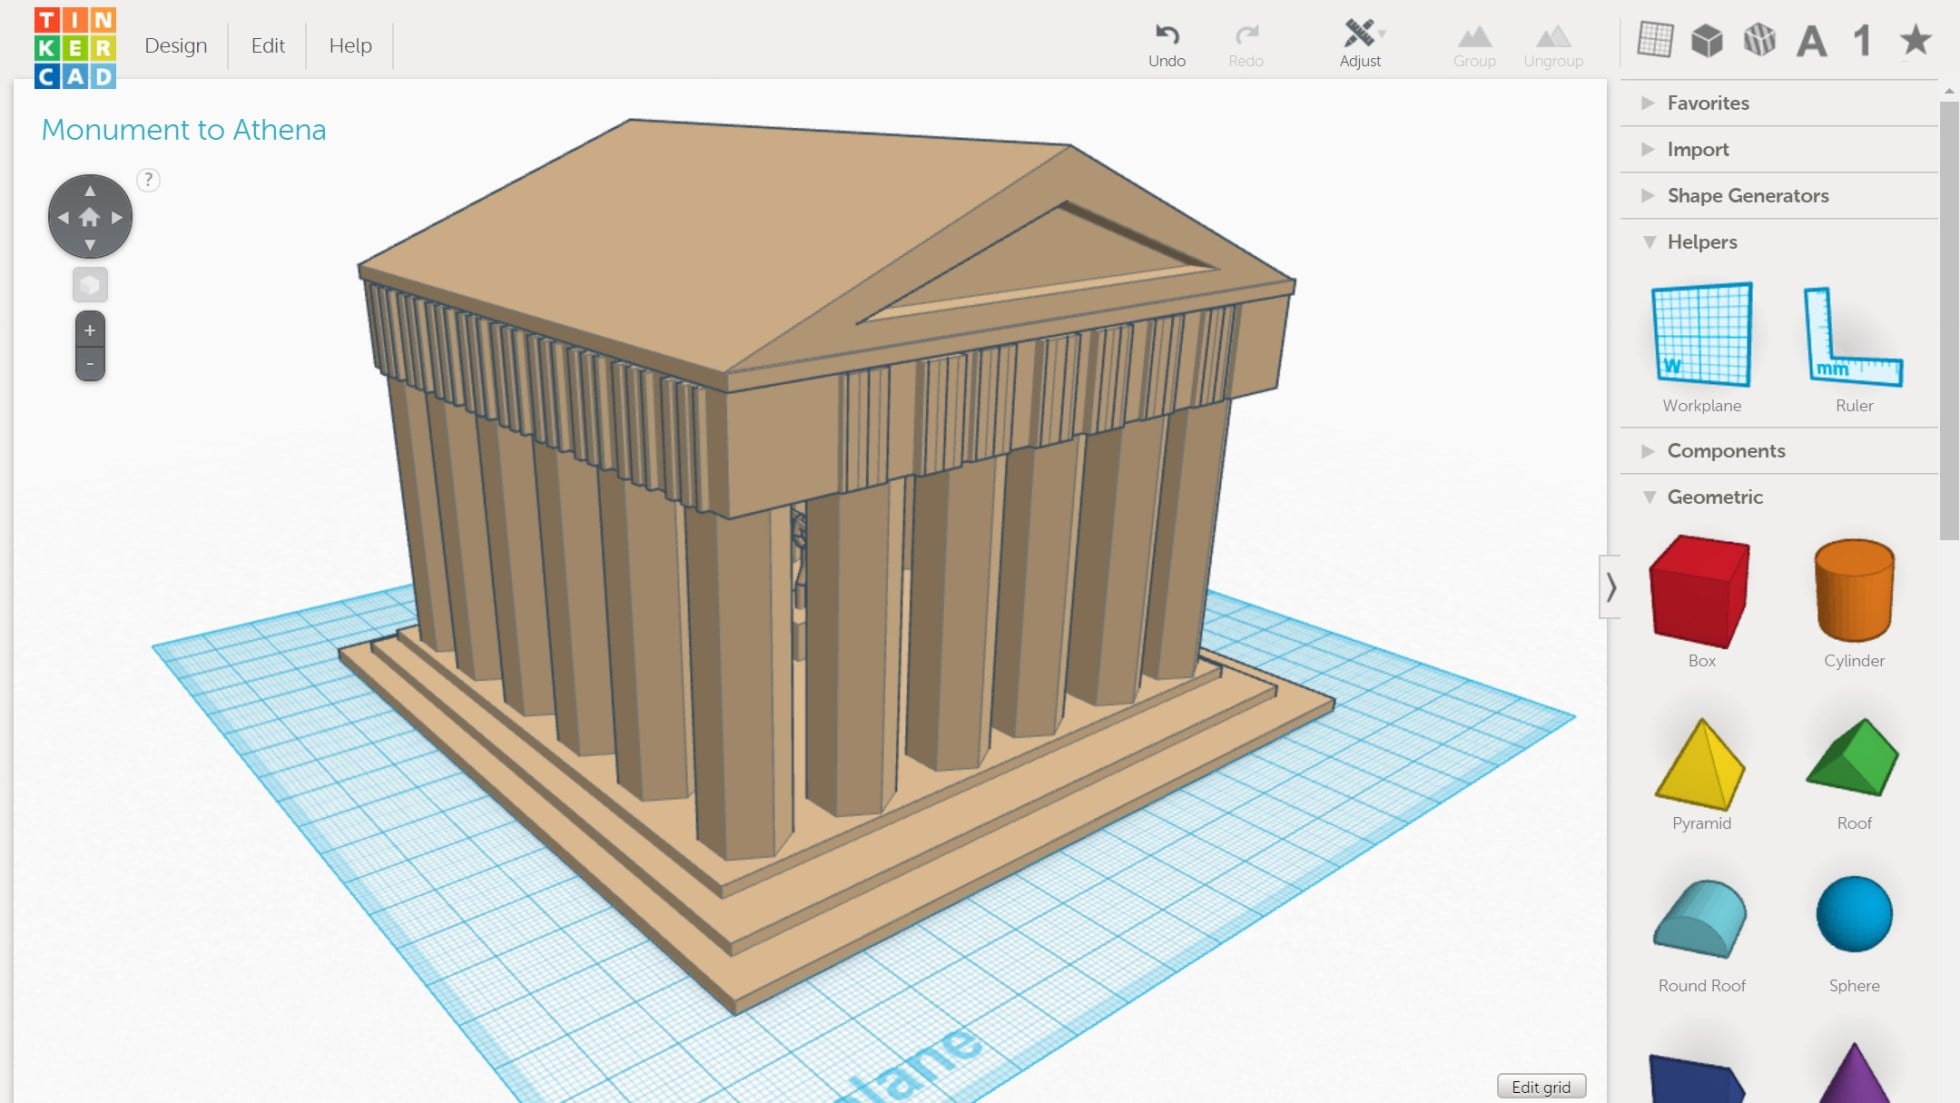 Screenshot of a Greek monument being created in TinkerCad